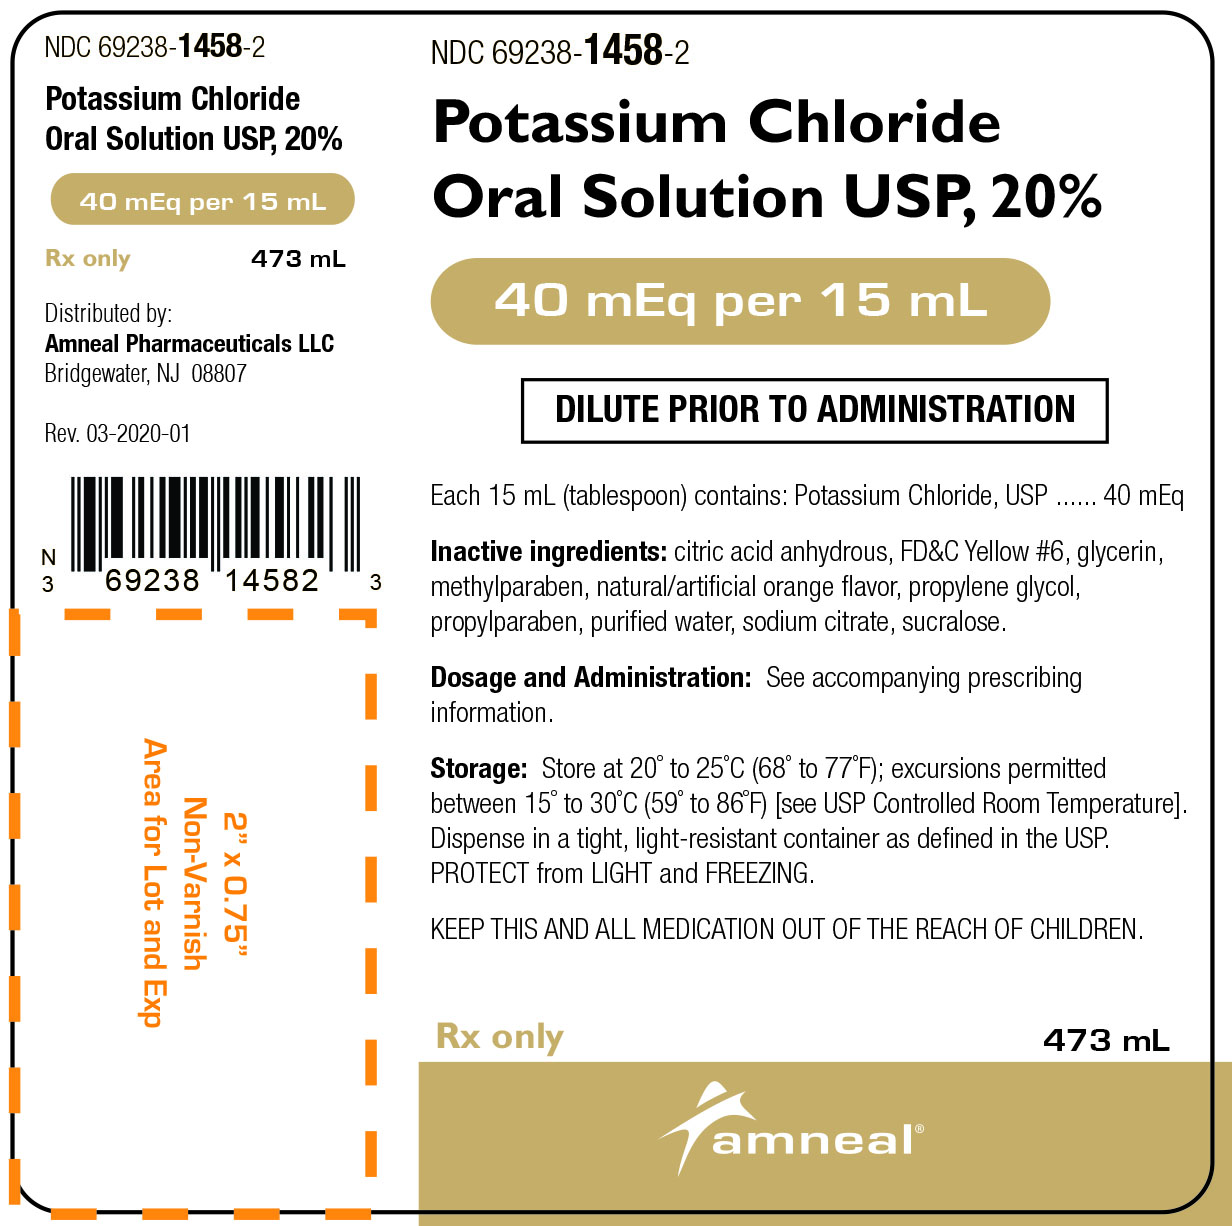 BUY Potassium Chloride (Potassium Chloride) 1.5 g/15mL from GNH India at  the best price available.